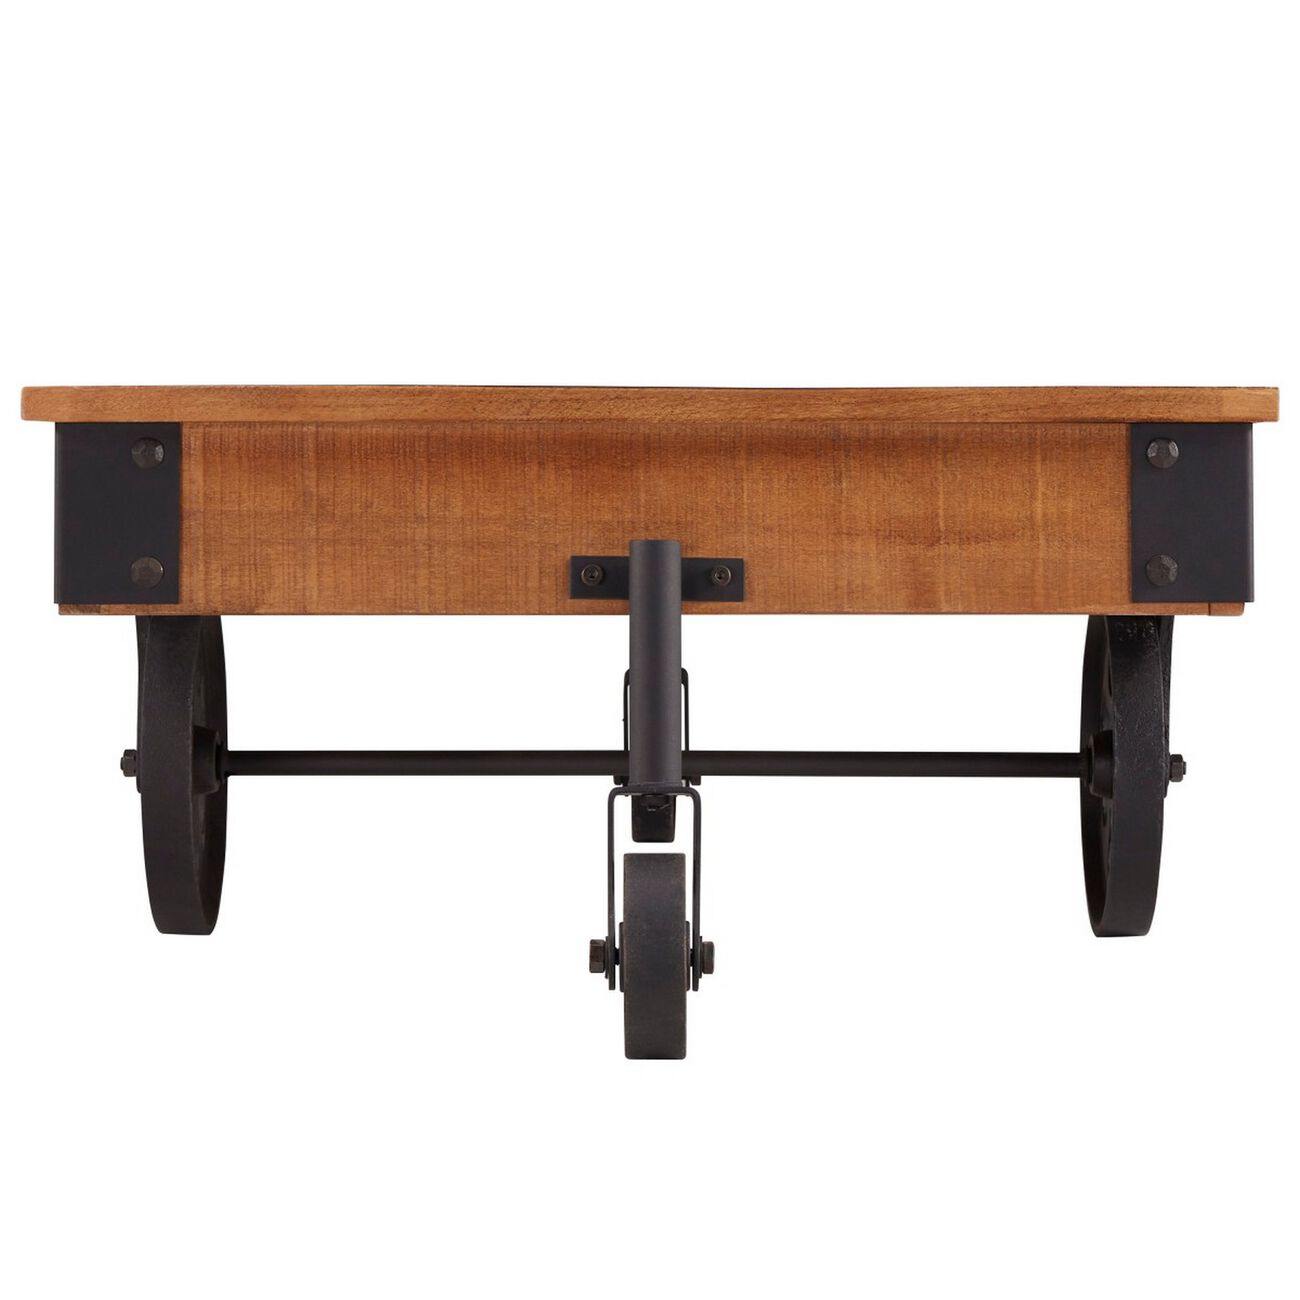 Plank Style Wooden Cocktail Table with Casters, Brown and Black